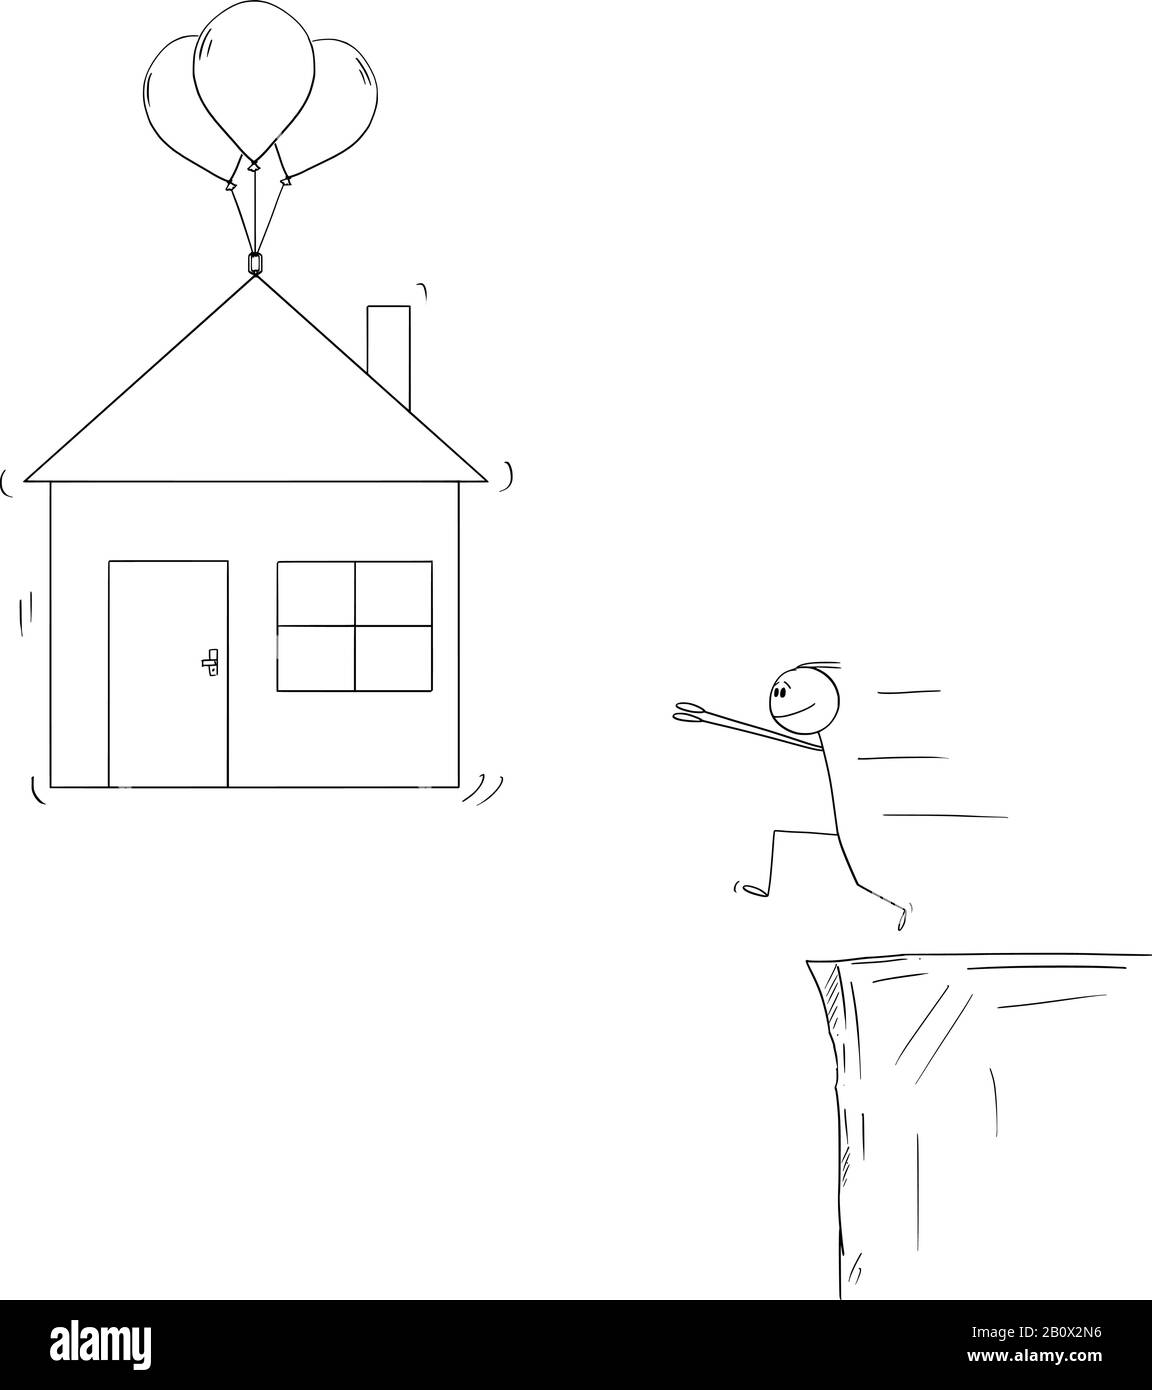 Vector cartoon stick figure drawing conceptual illustration of man trying to get mortgage and buy family house, but is not able to get it or pay it. Stock Vector